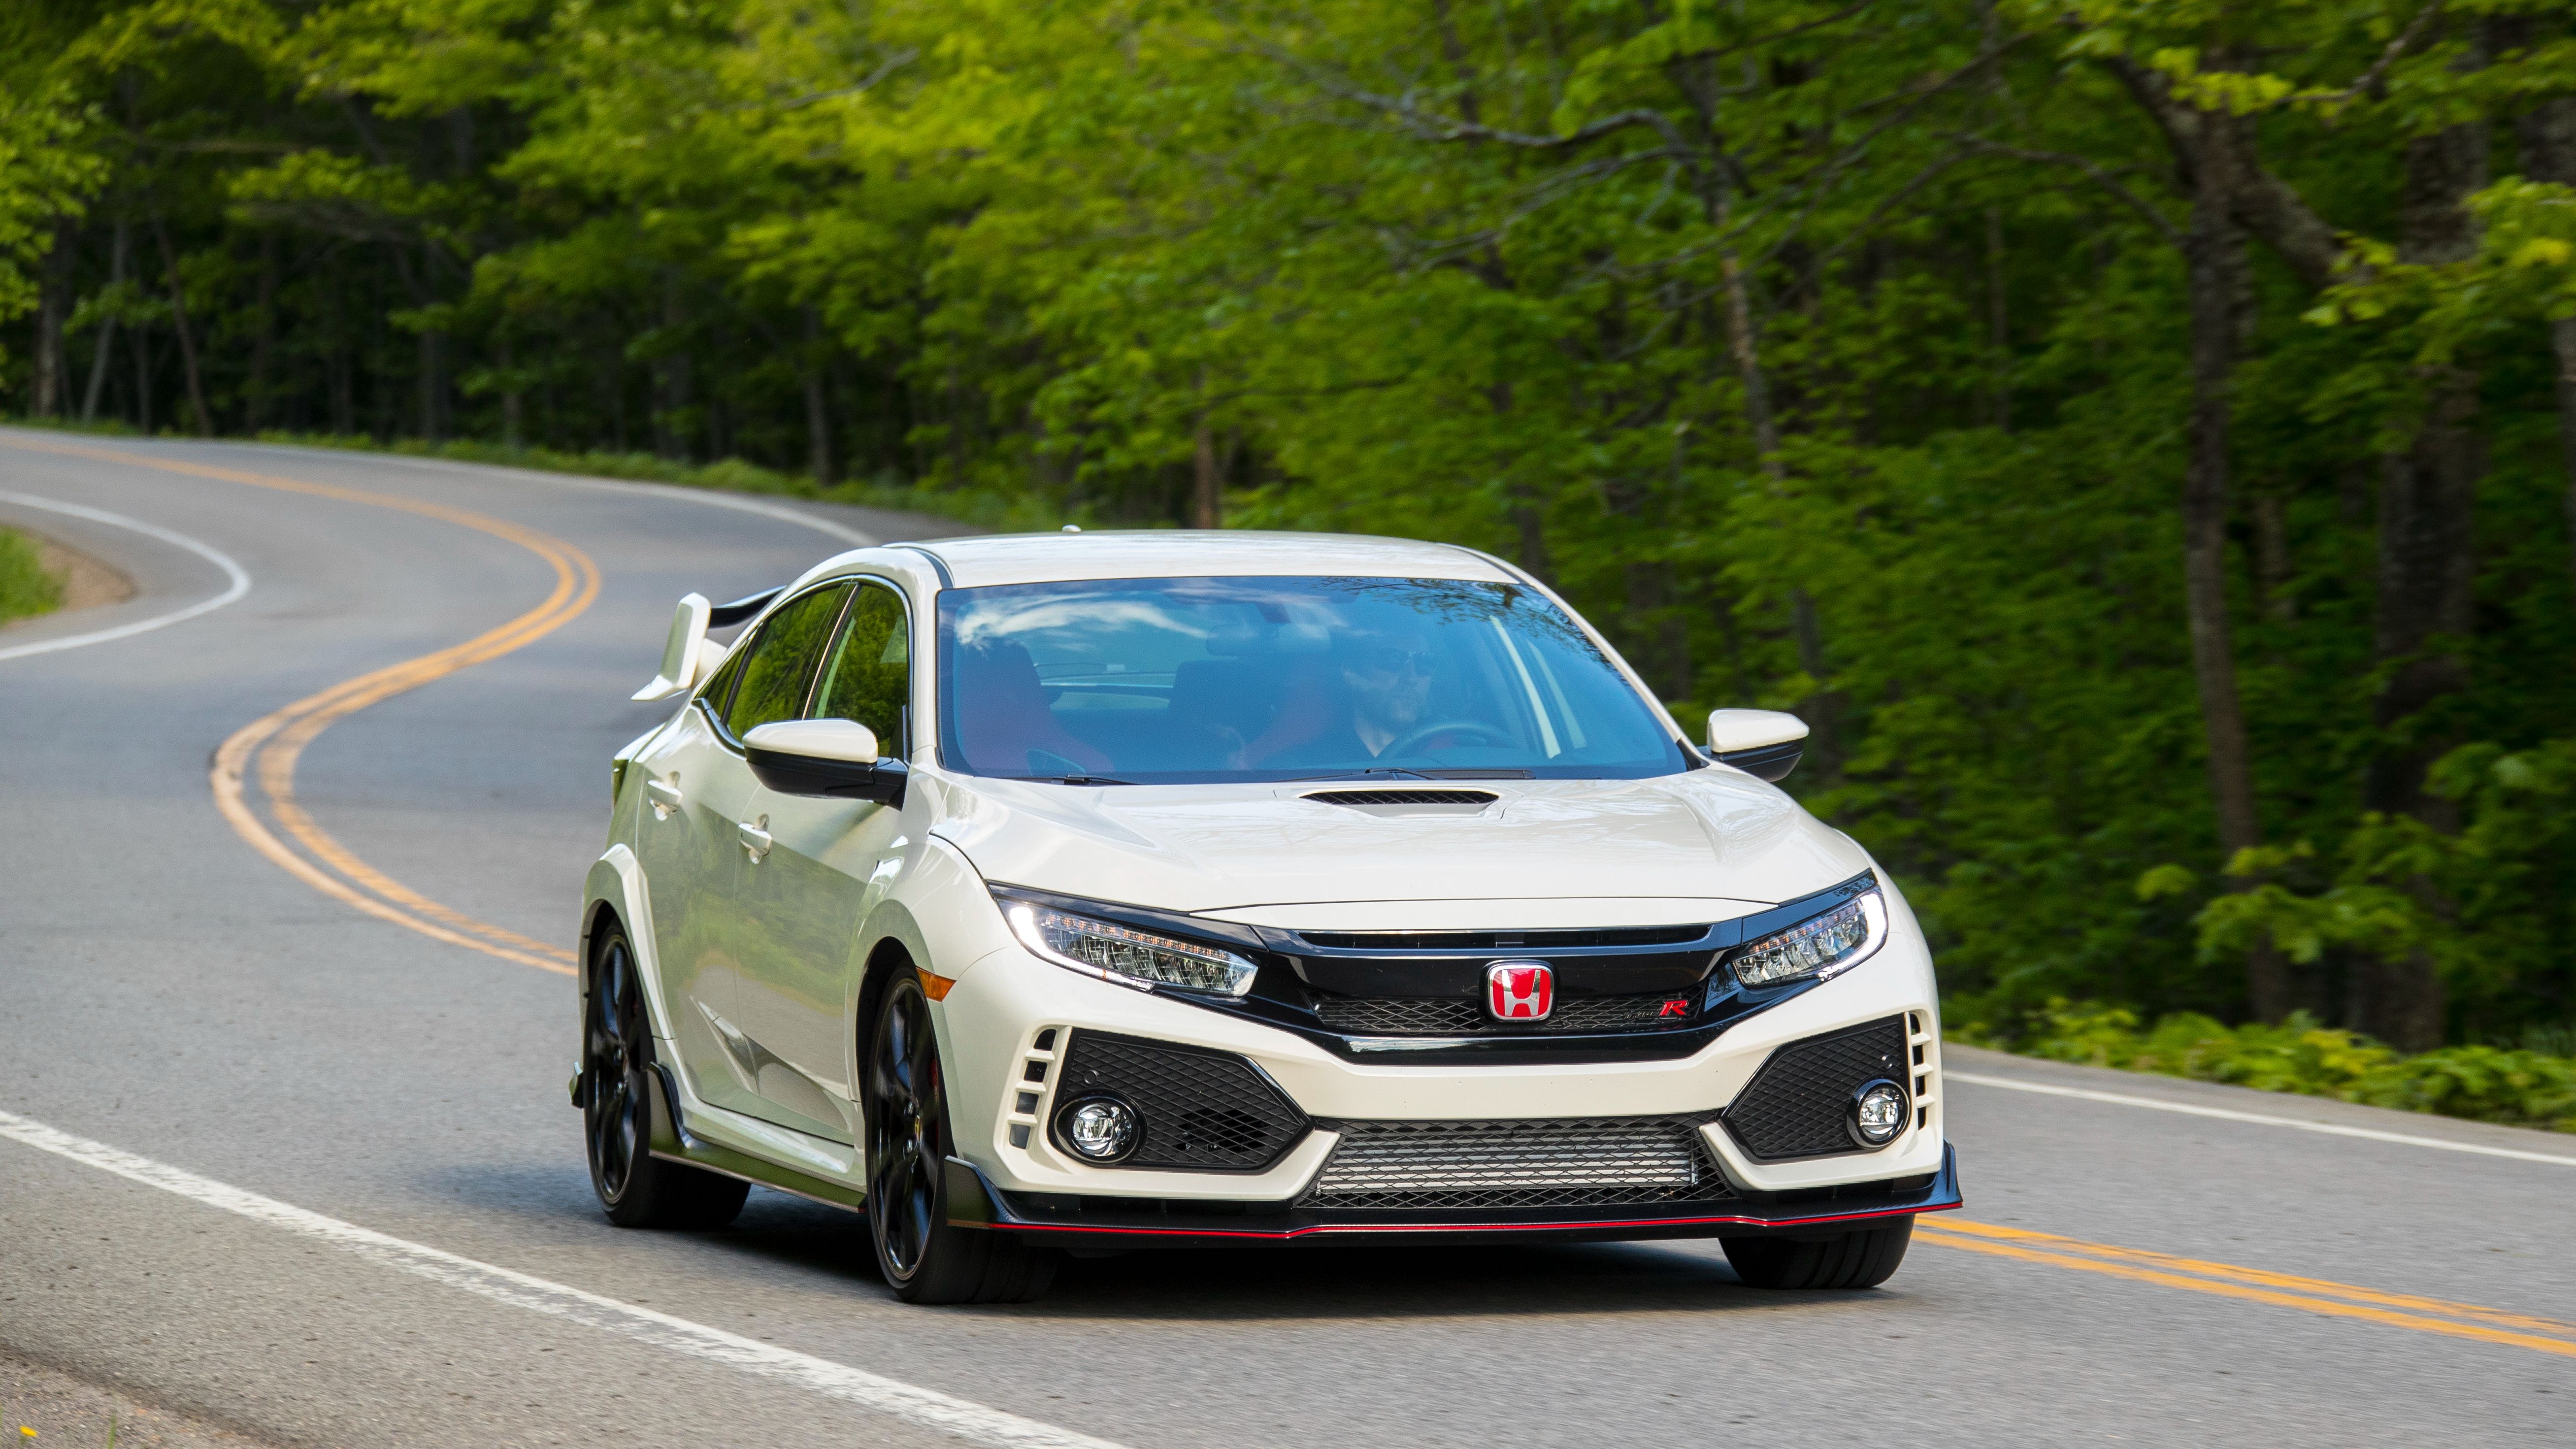 The 2017 Honda Civic R on the road.